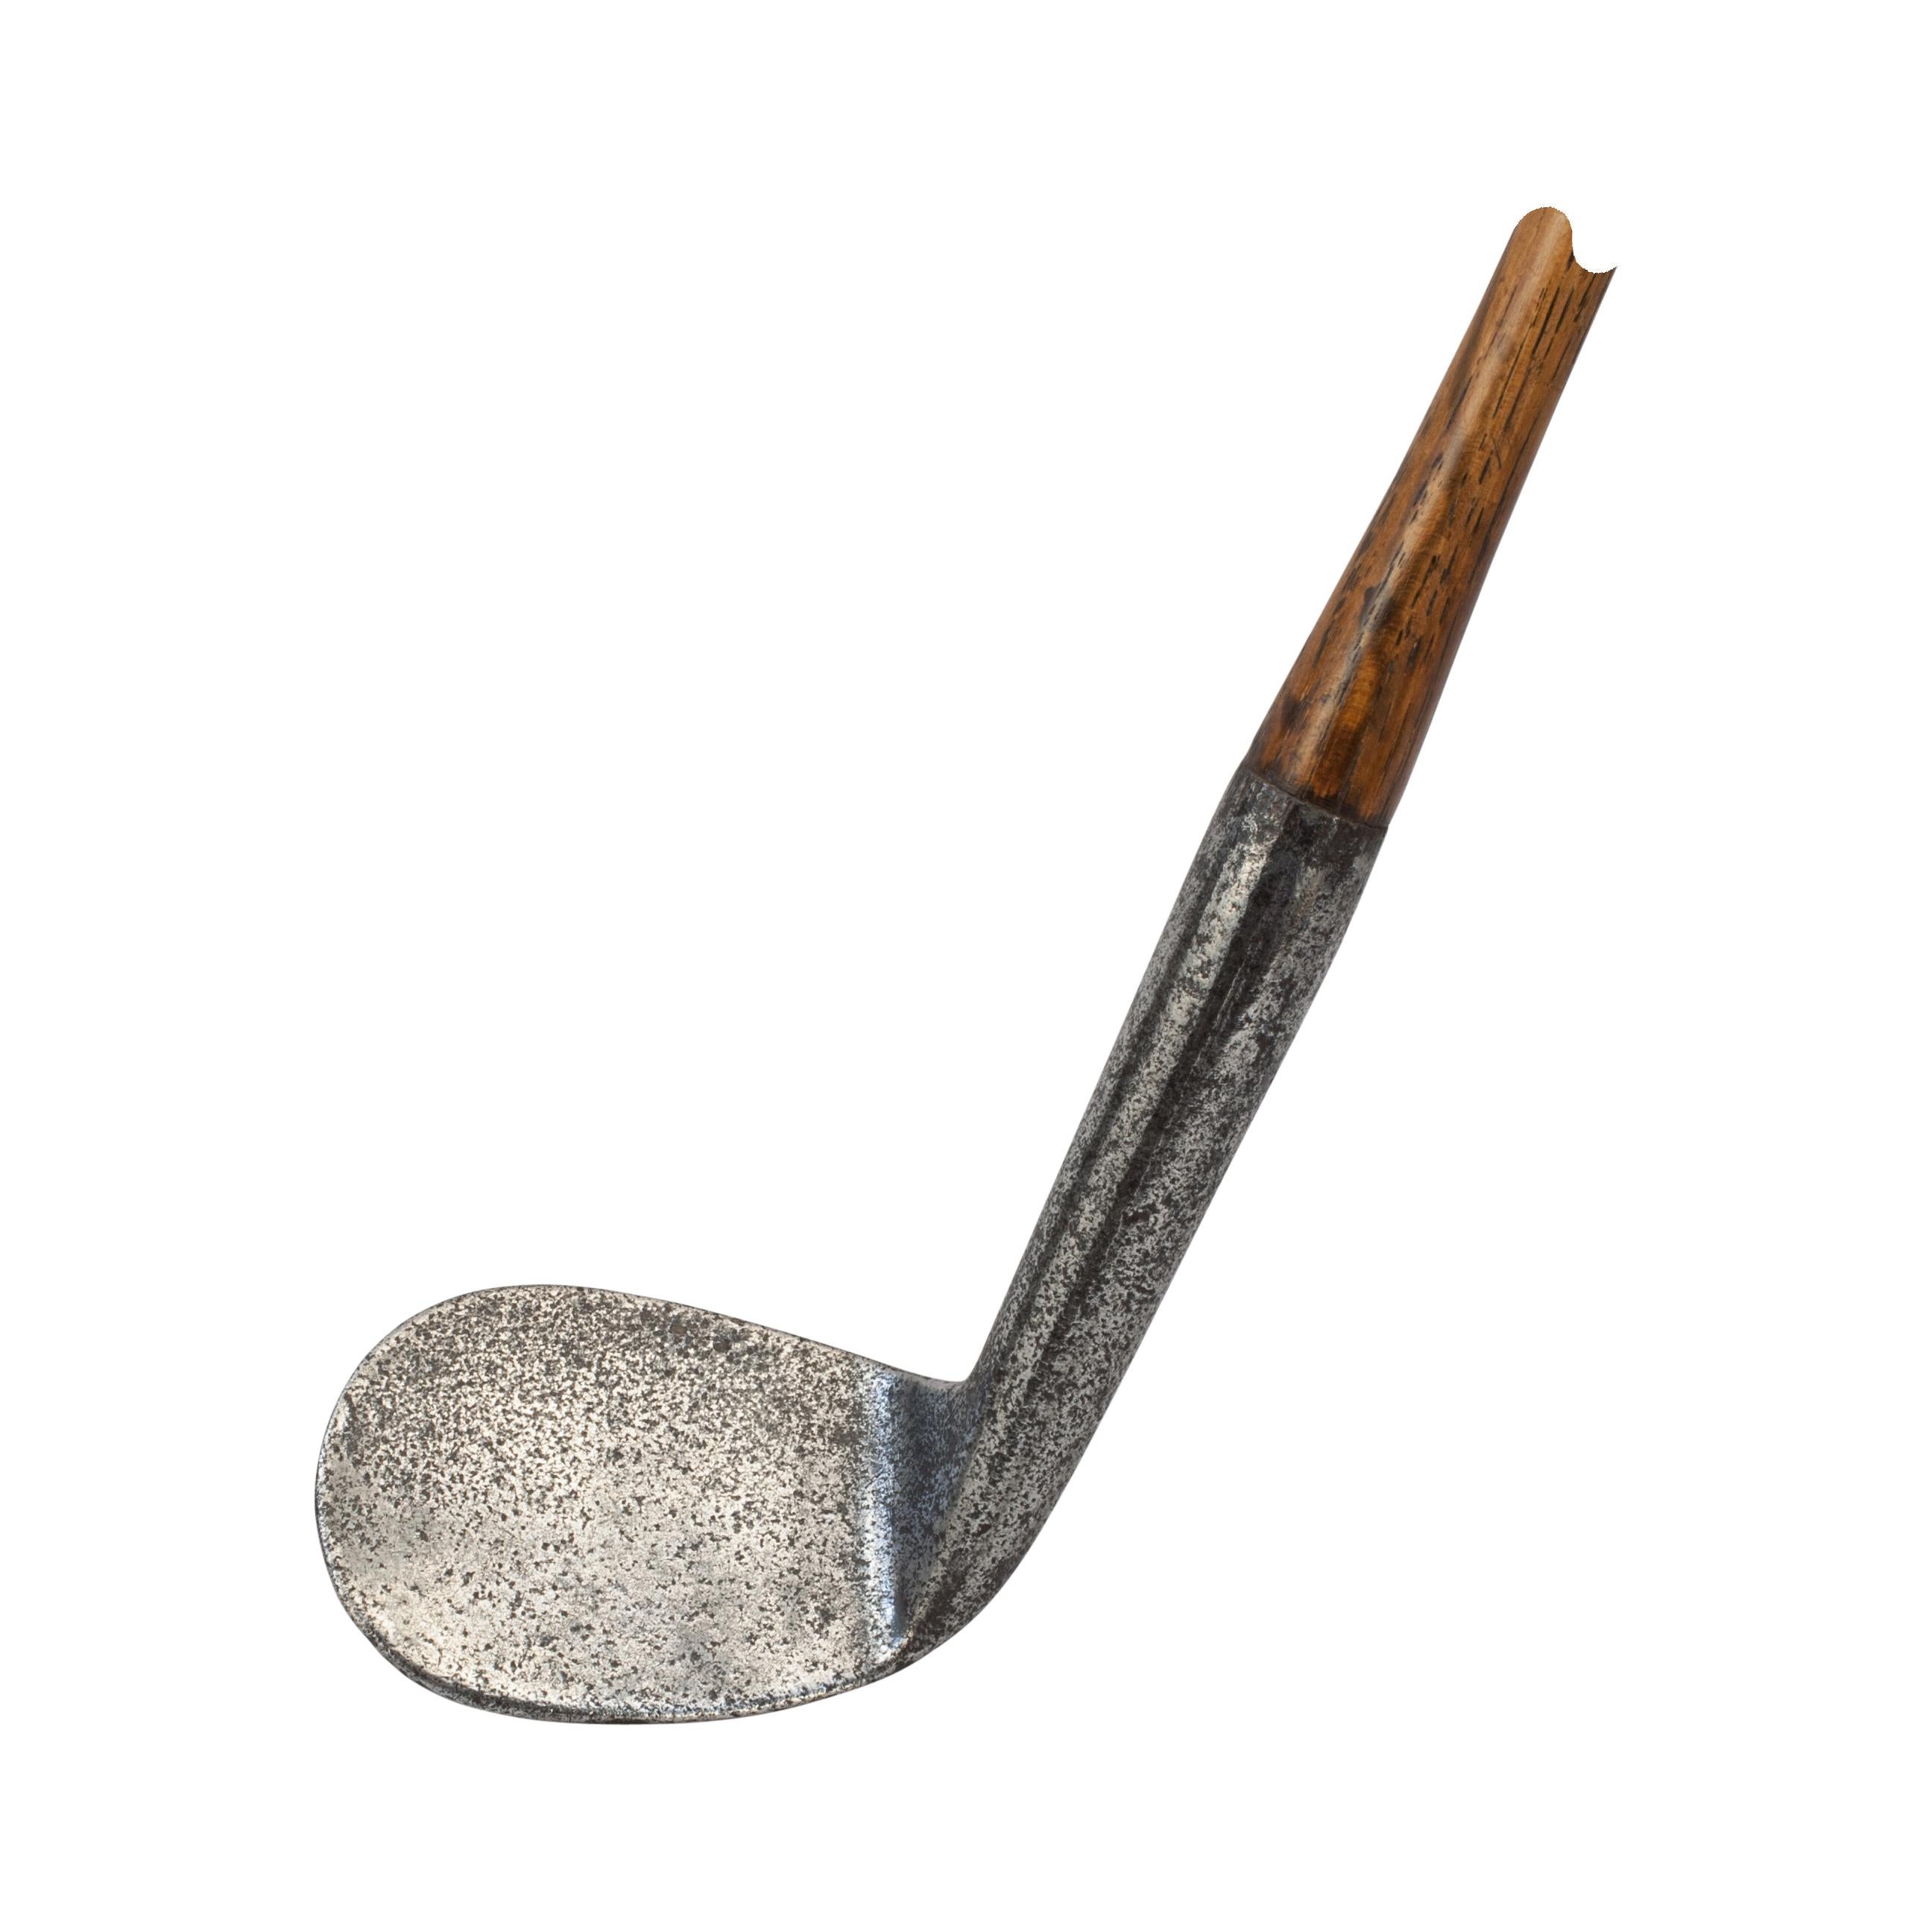 Hickory Shafted Rut Iron.
A good quality smooth faced rut iron, also known as a rut niblick, rutter or track iron. Rut irons were commonly used to hit the ball from cart tracks and deep ruts etc. Young Tom Morris was known to hit his rut iron from